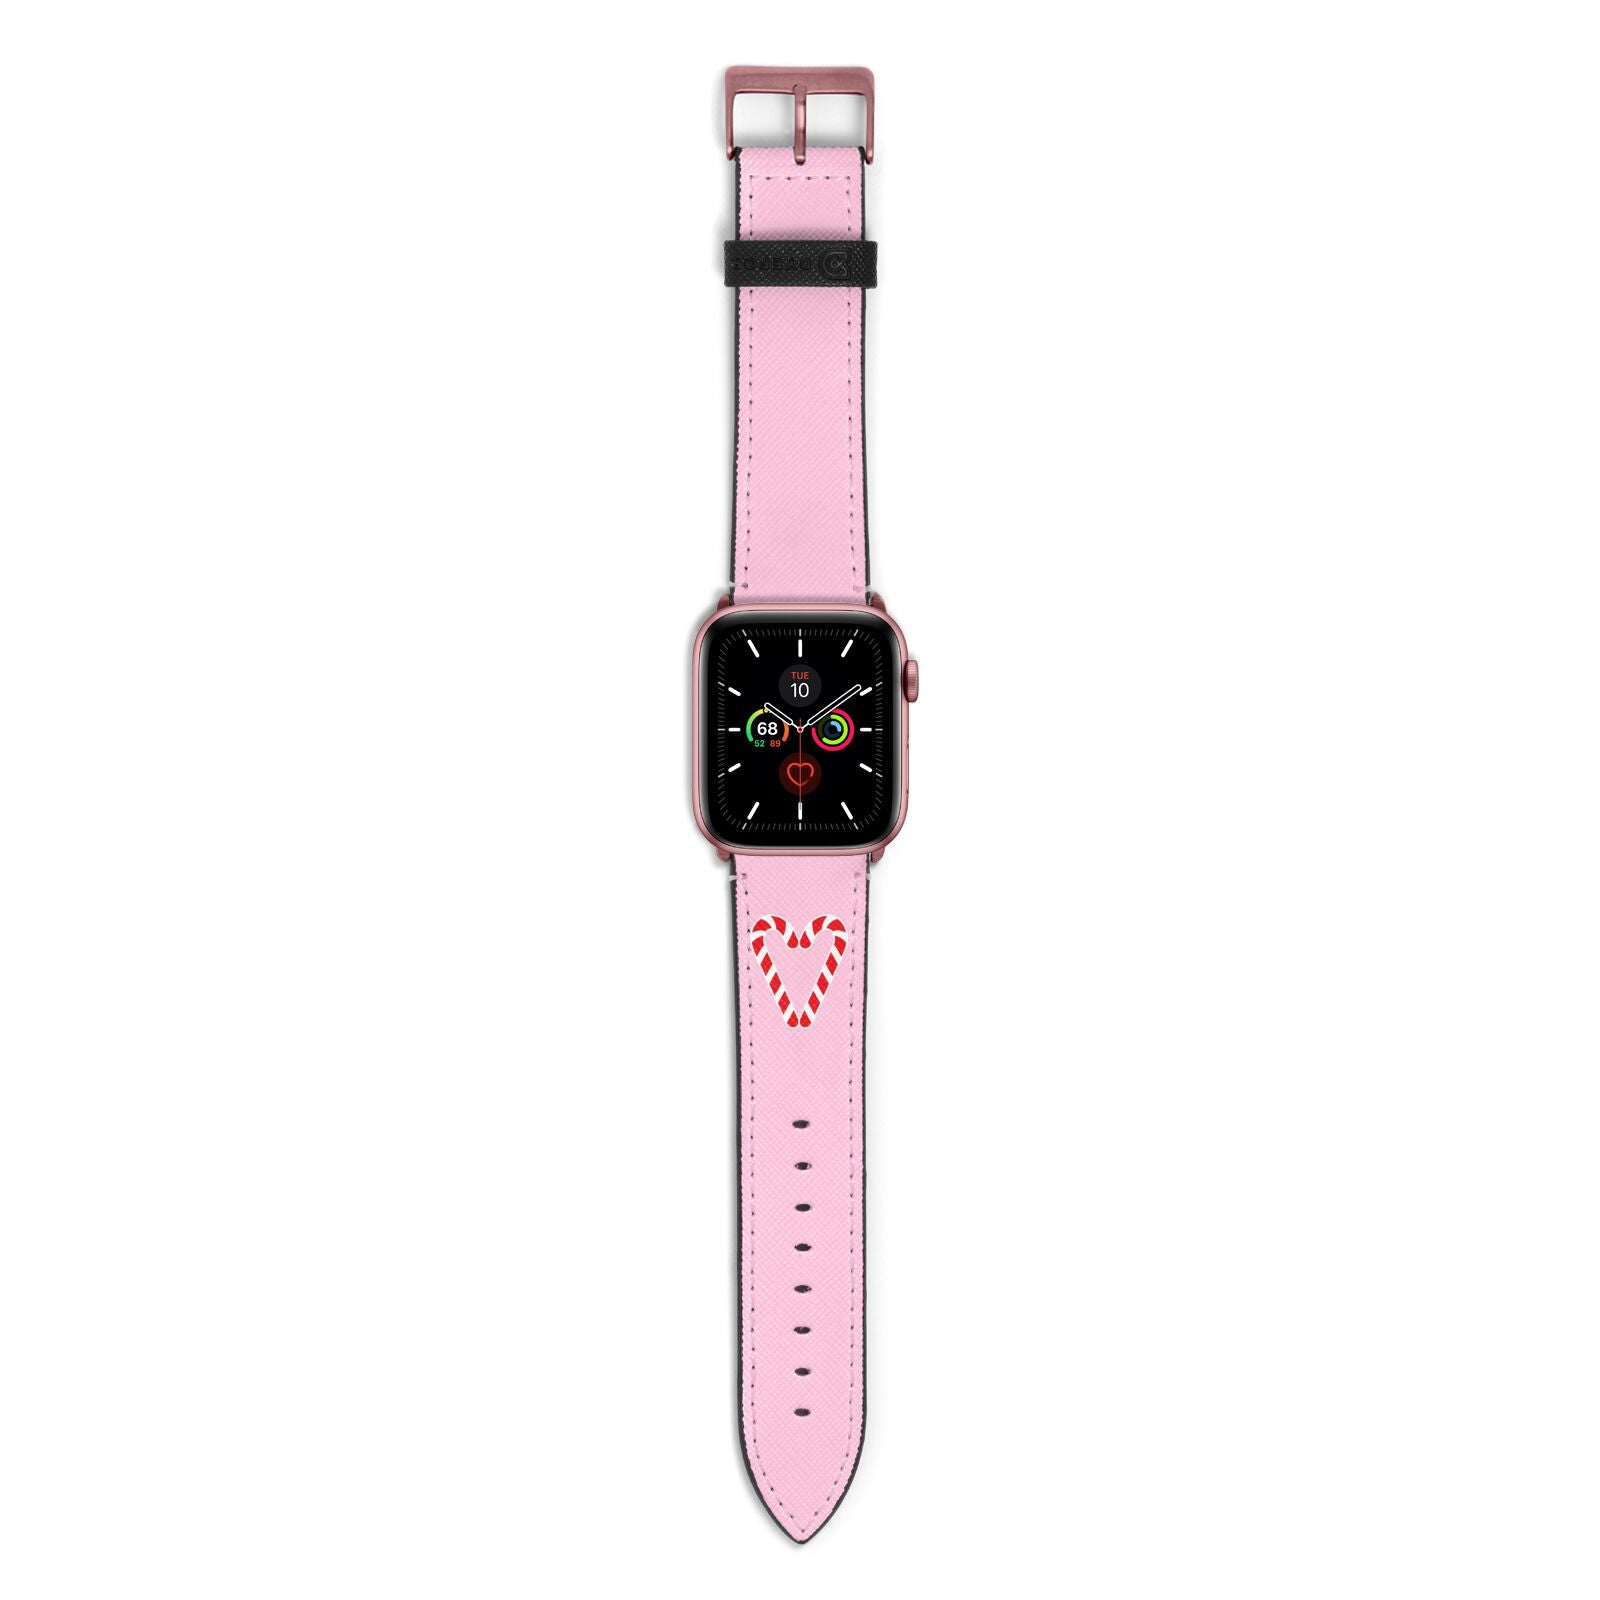 Candy Cane Heart Apple Watch Strap with Rose Gold Hardware